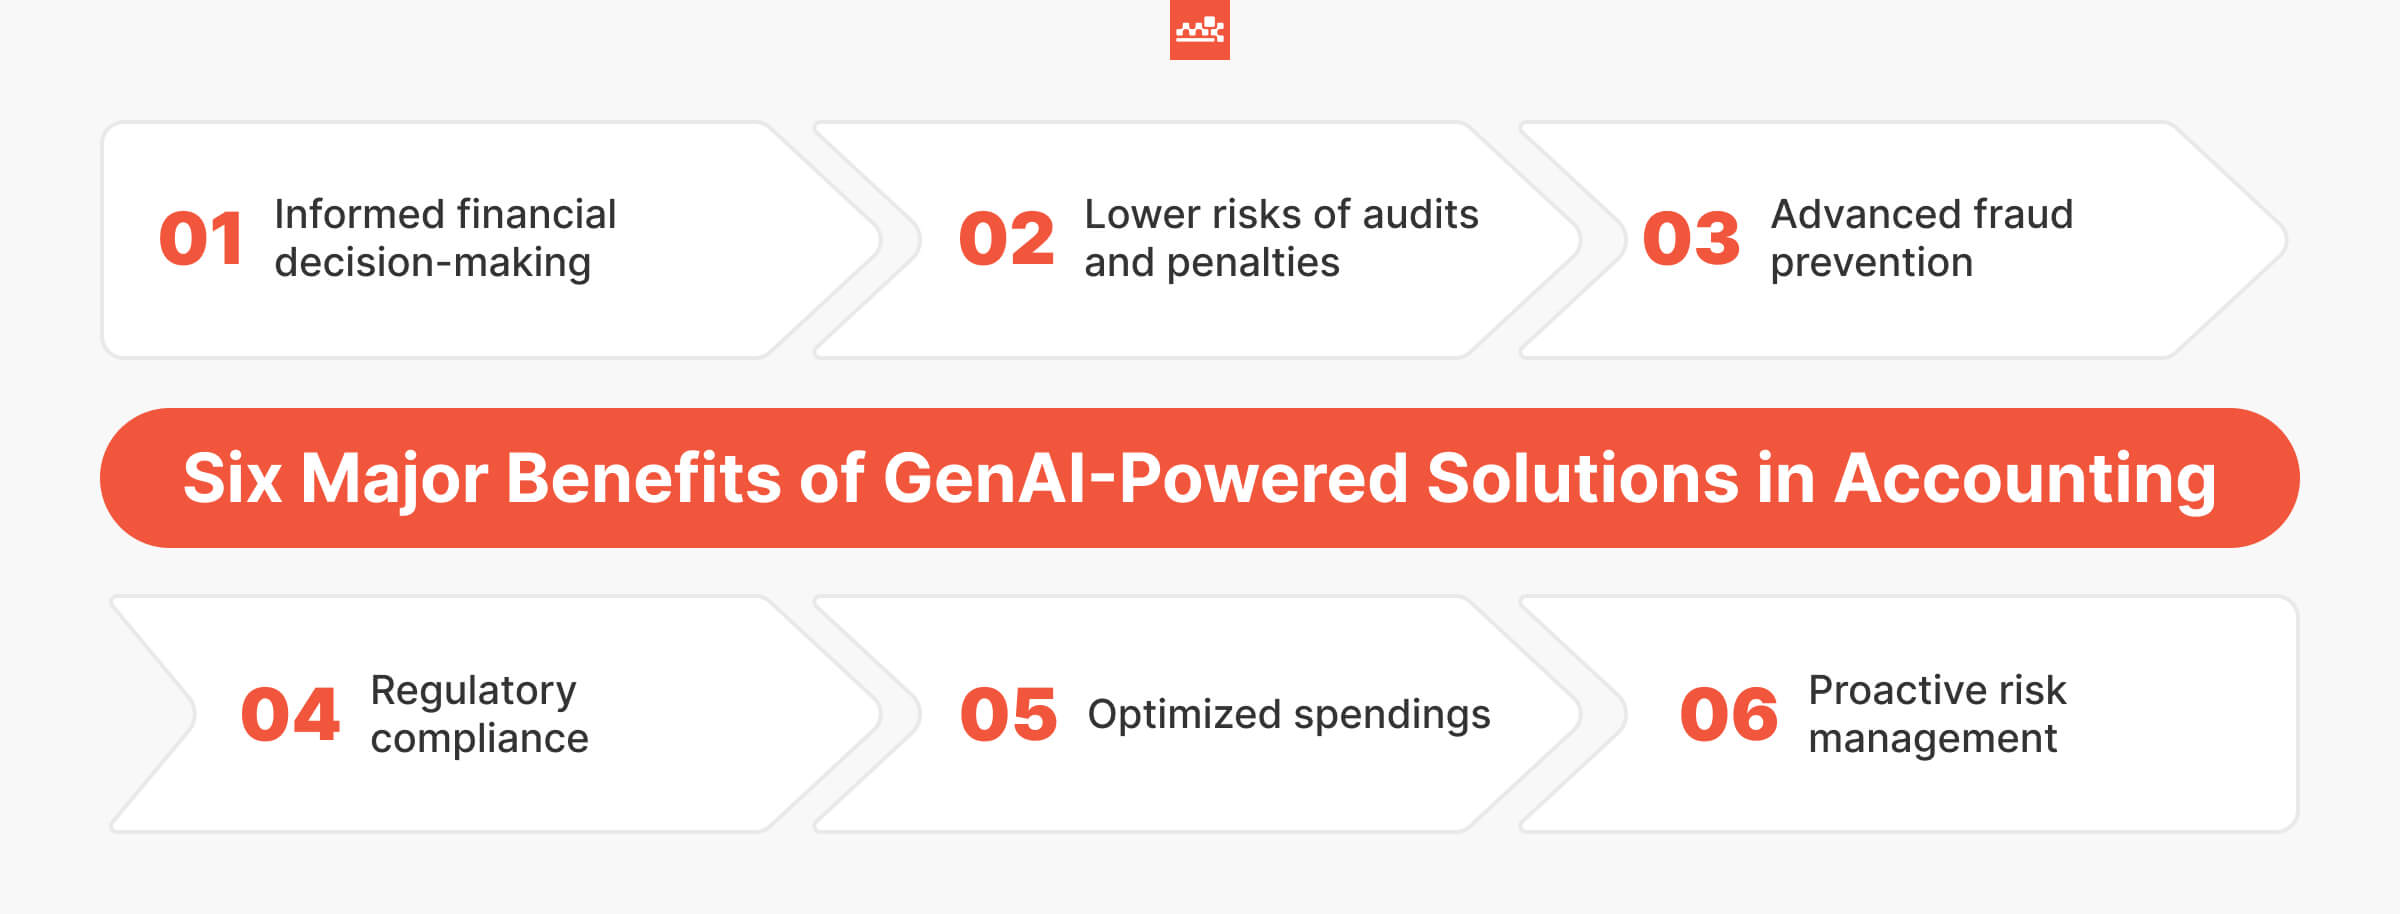 Six Major Benefits of GenAI-Powered Solutions in Accounting